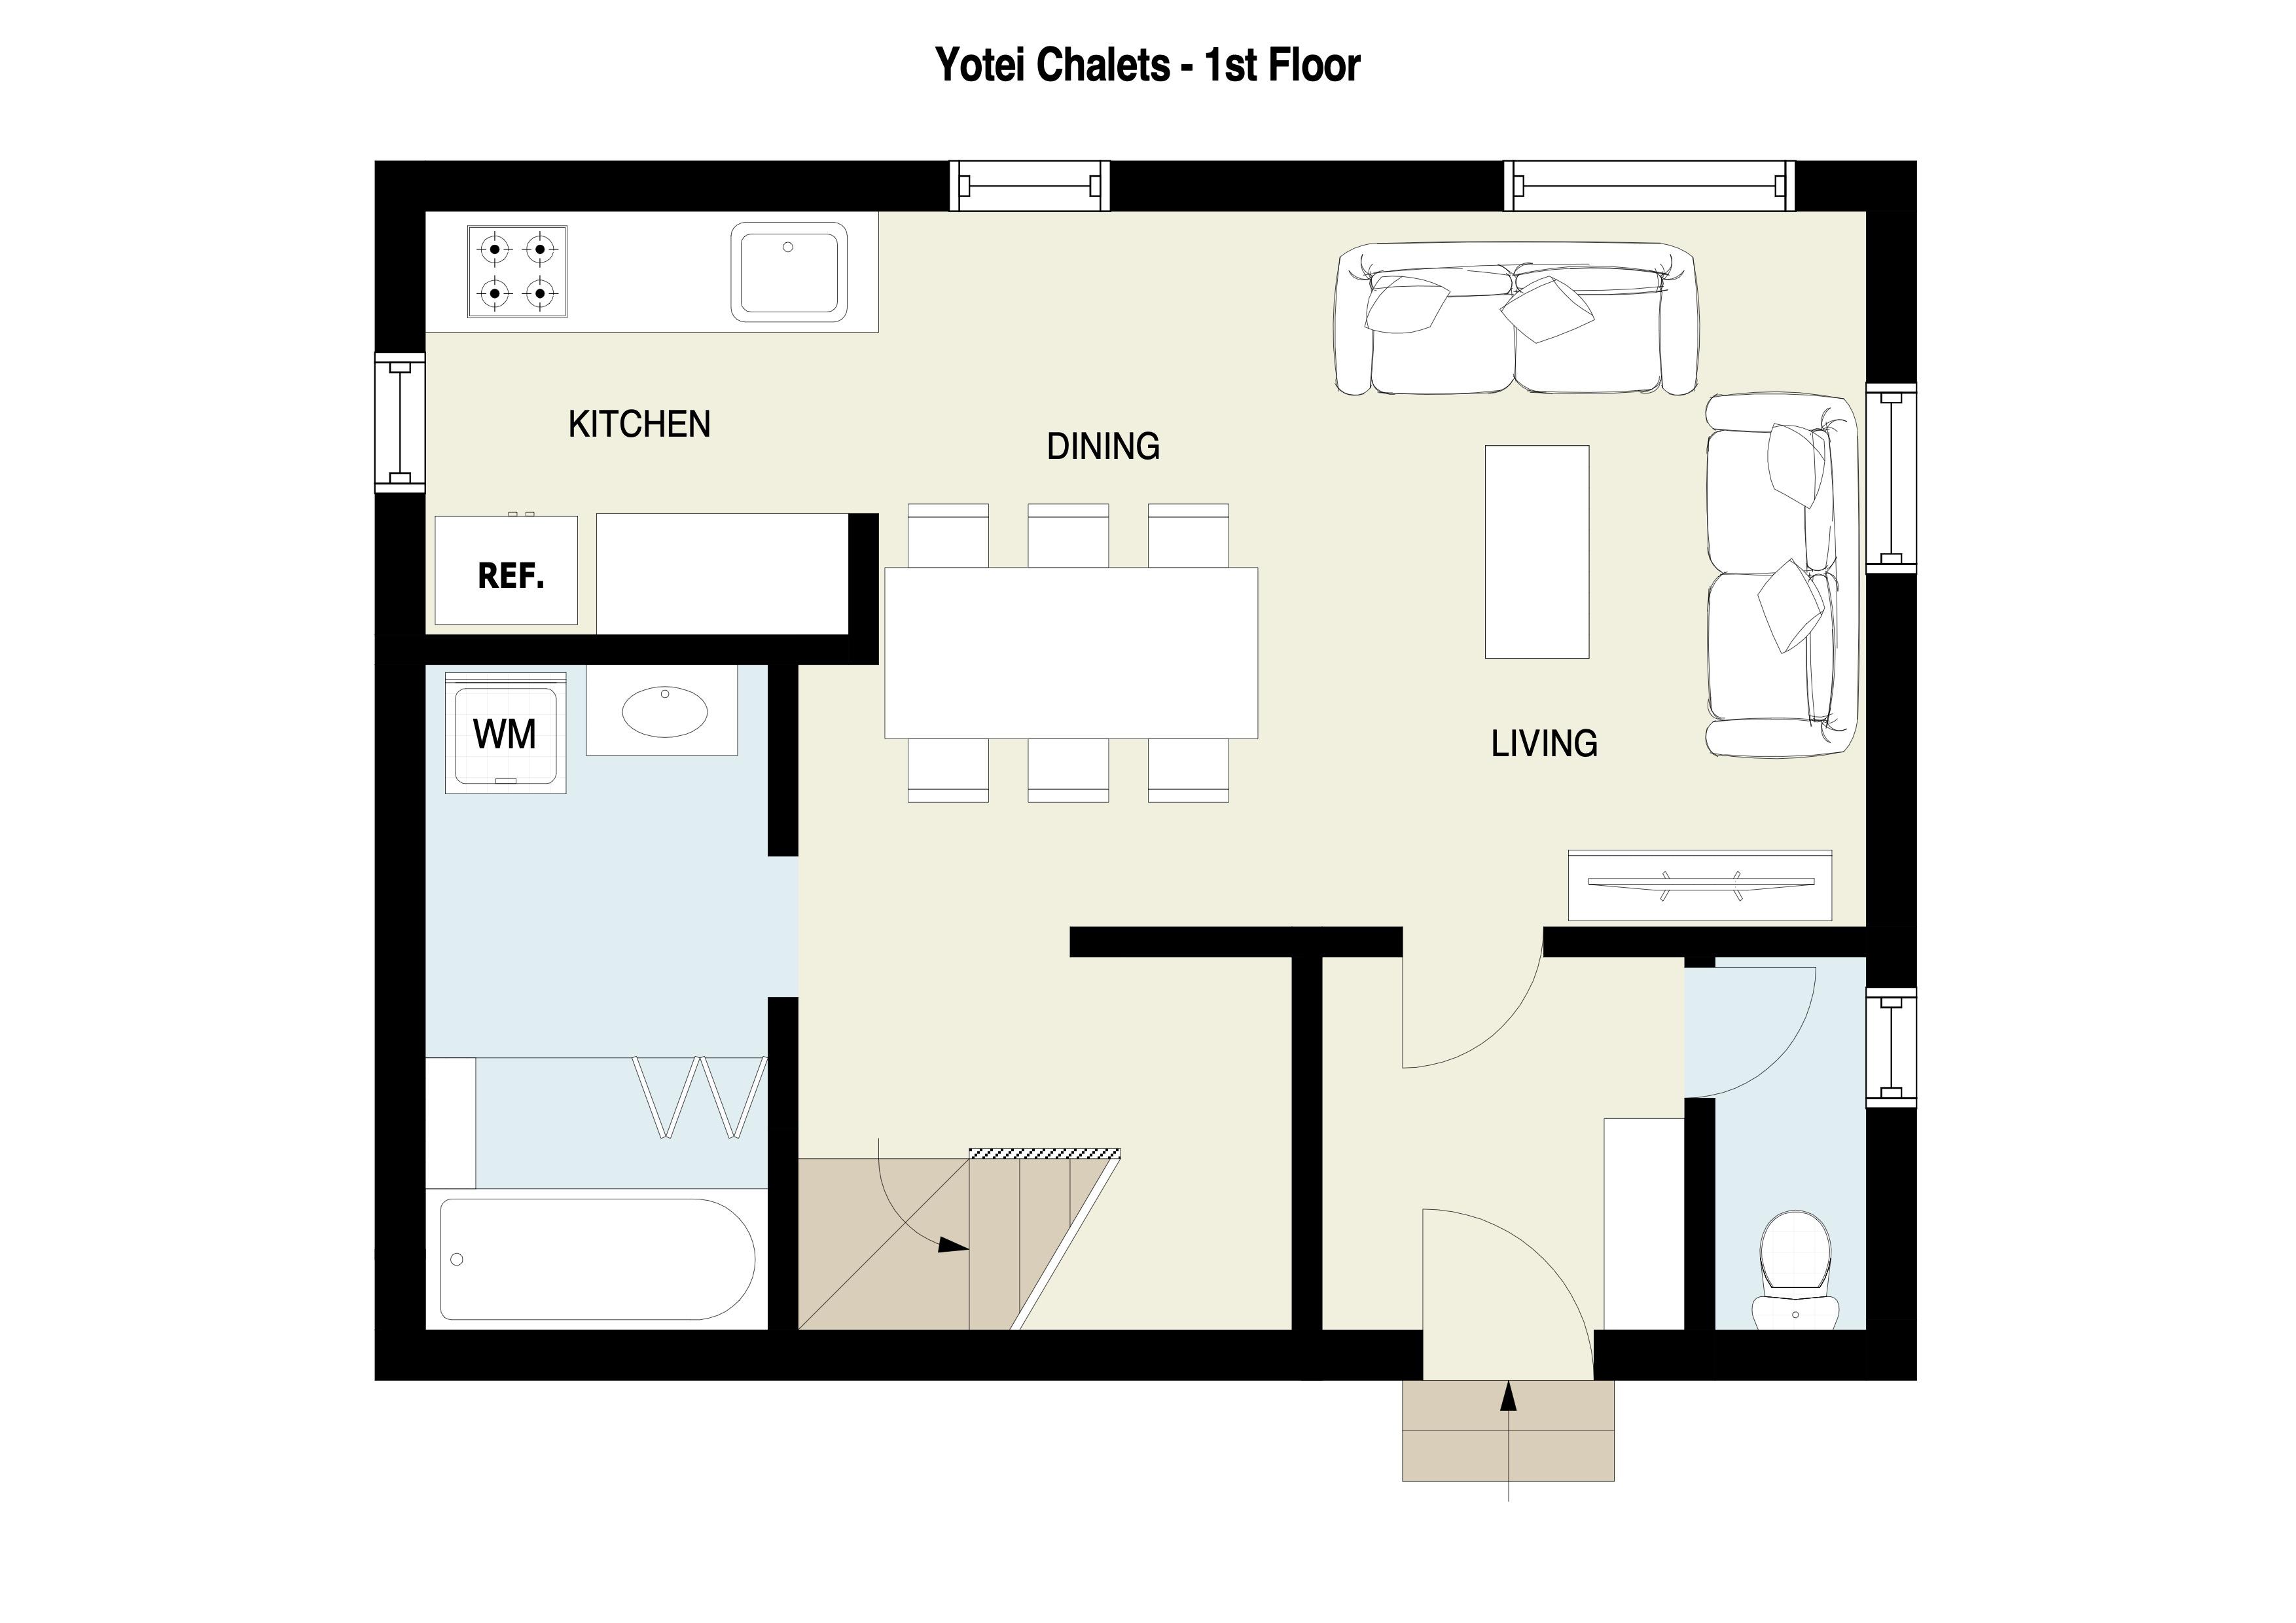 Yotei Chalets First Floor Plans